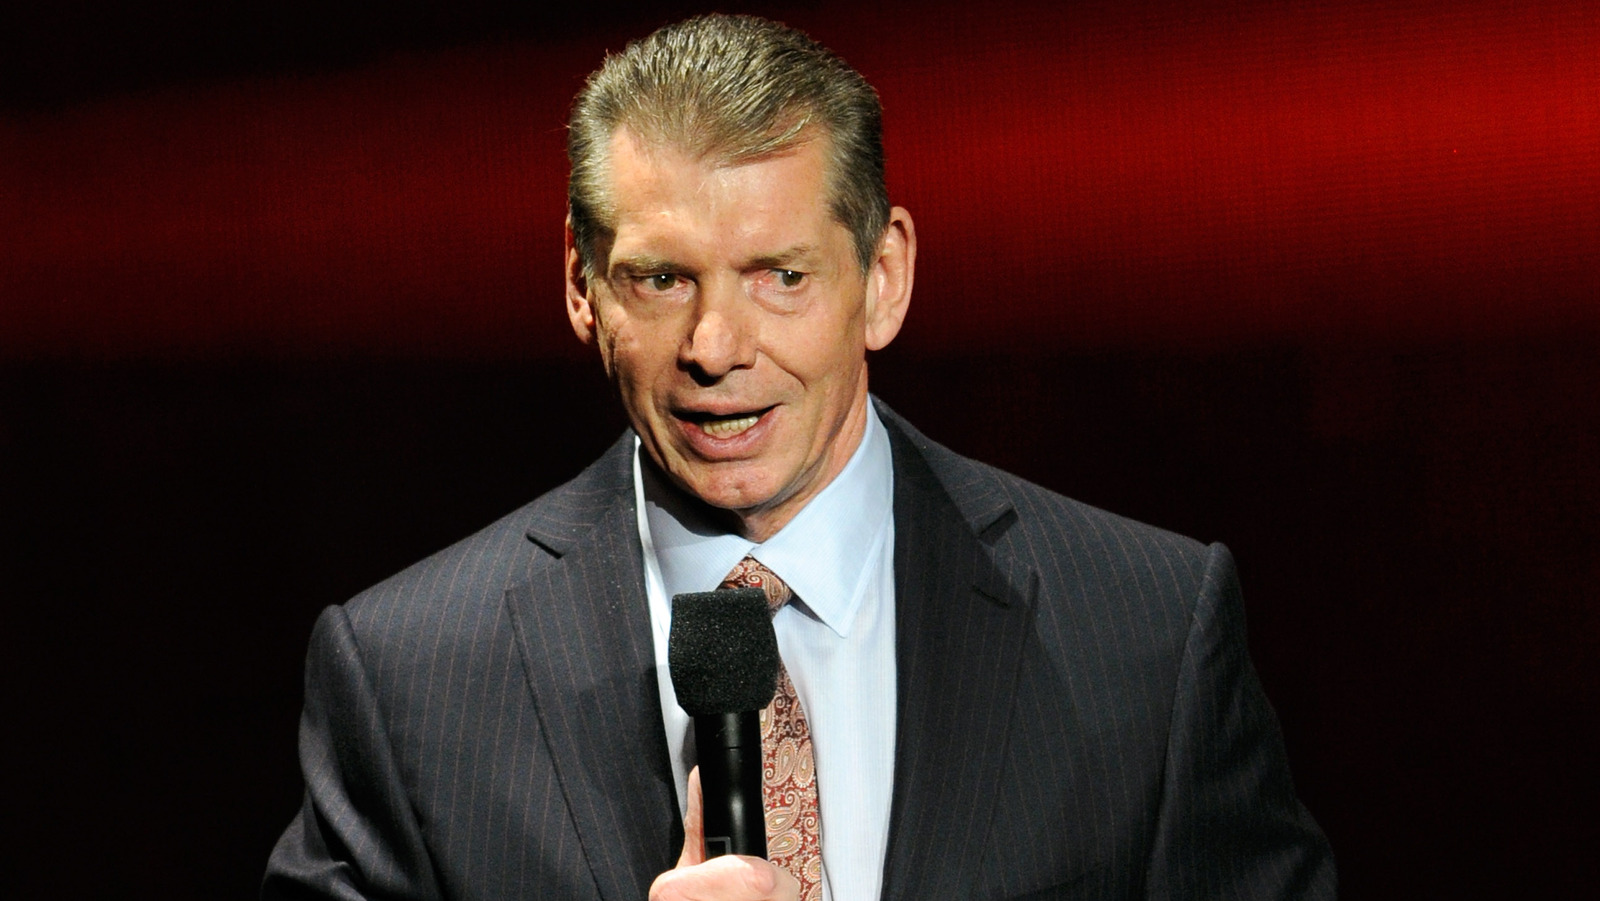 Law Firm Launches Website To Help Victims Of 'Vince McMahon Or Anyone From WWE/UFC'